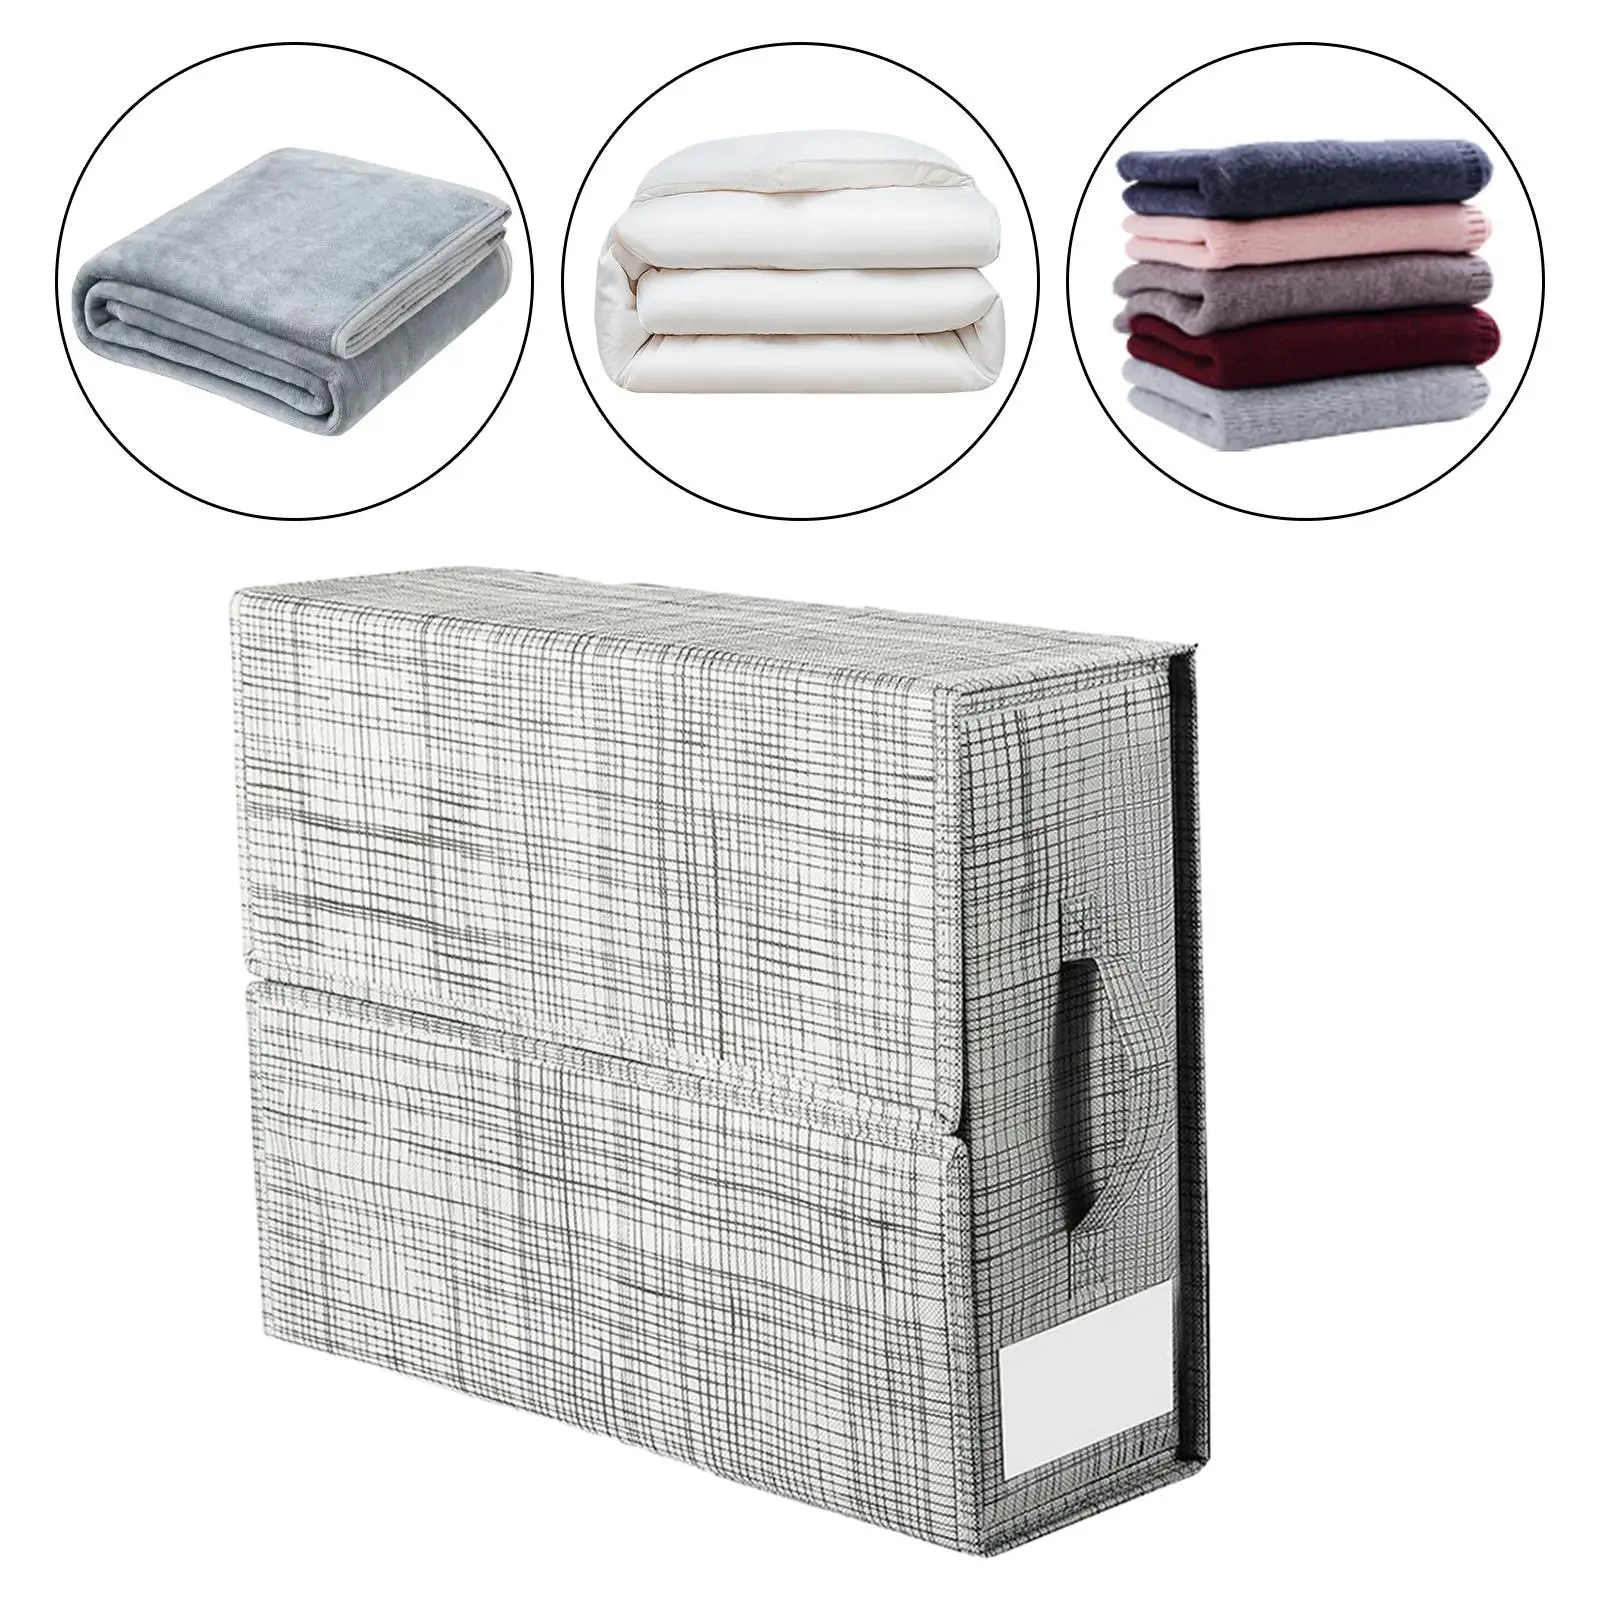 Foldable Bed Sheet Set Organizer for Clothes Queen Or King Sheets Pillow